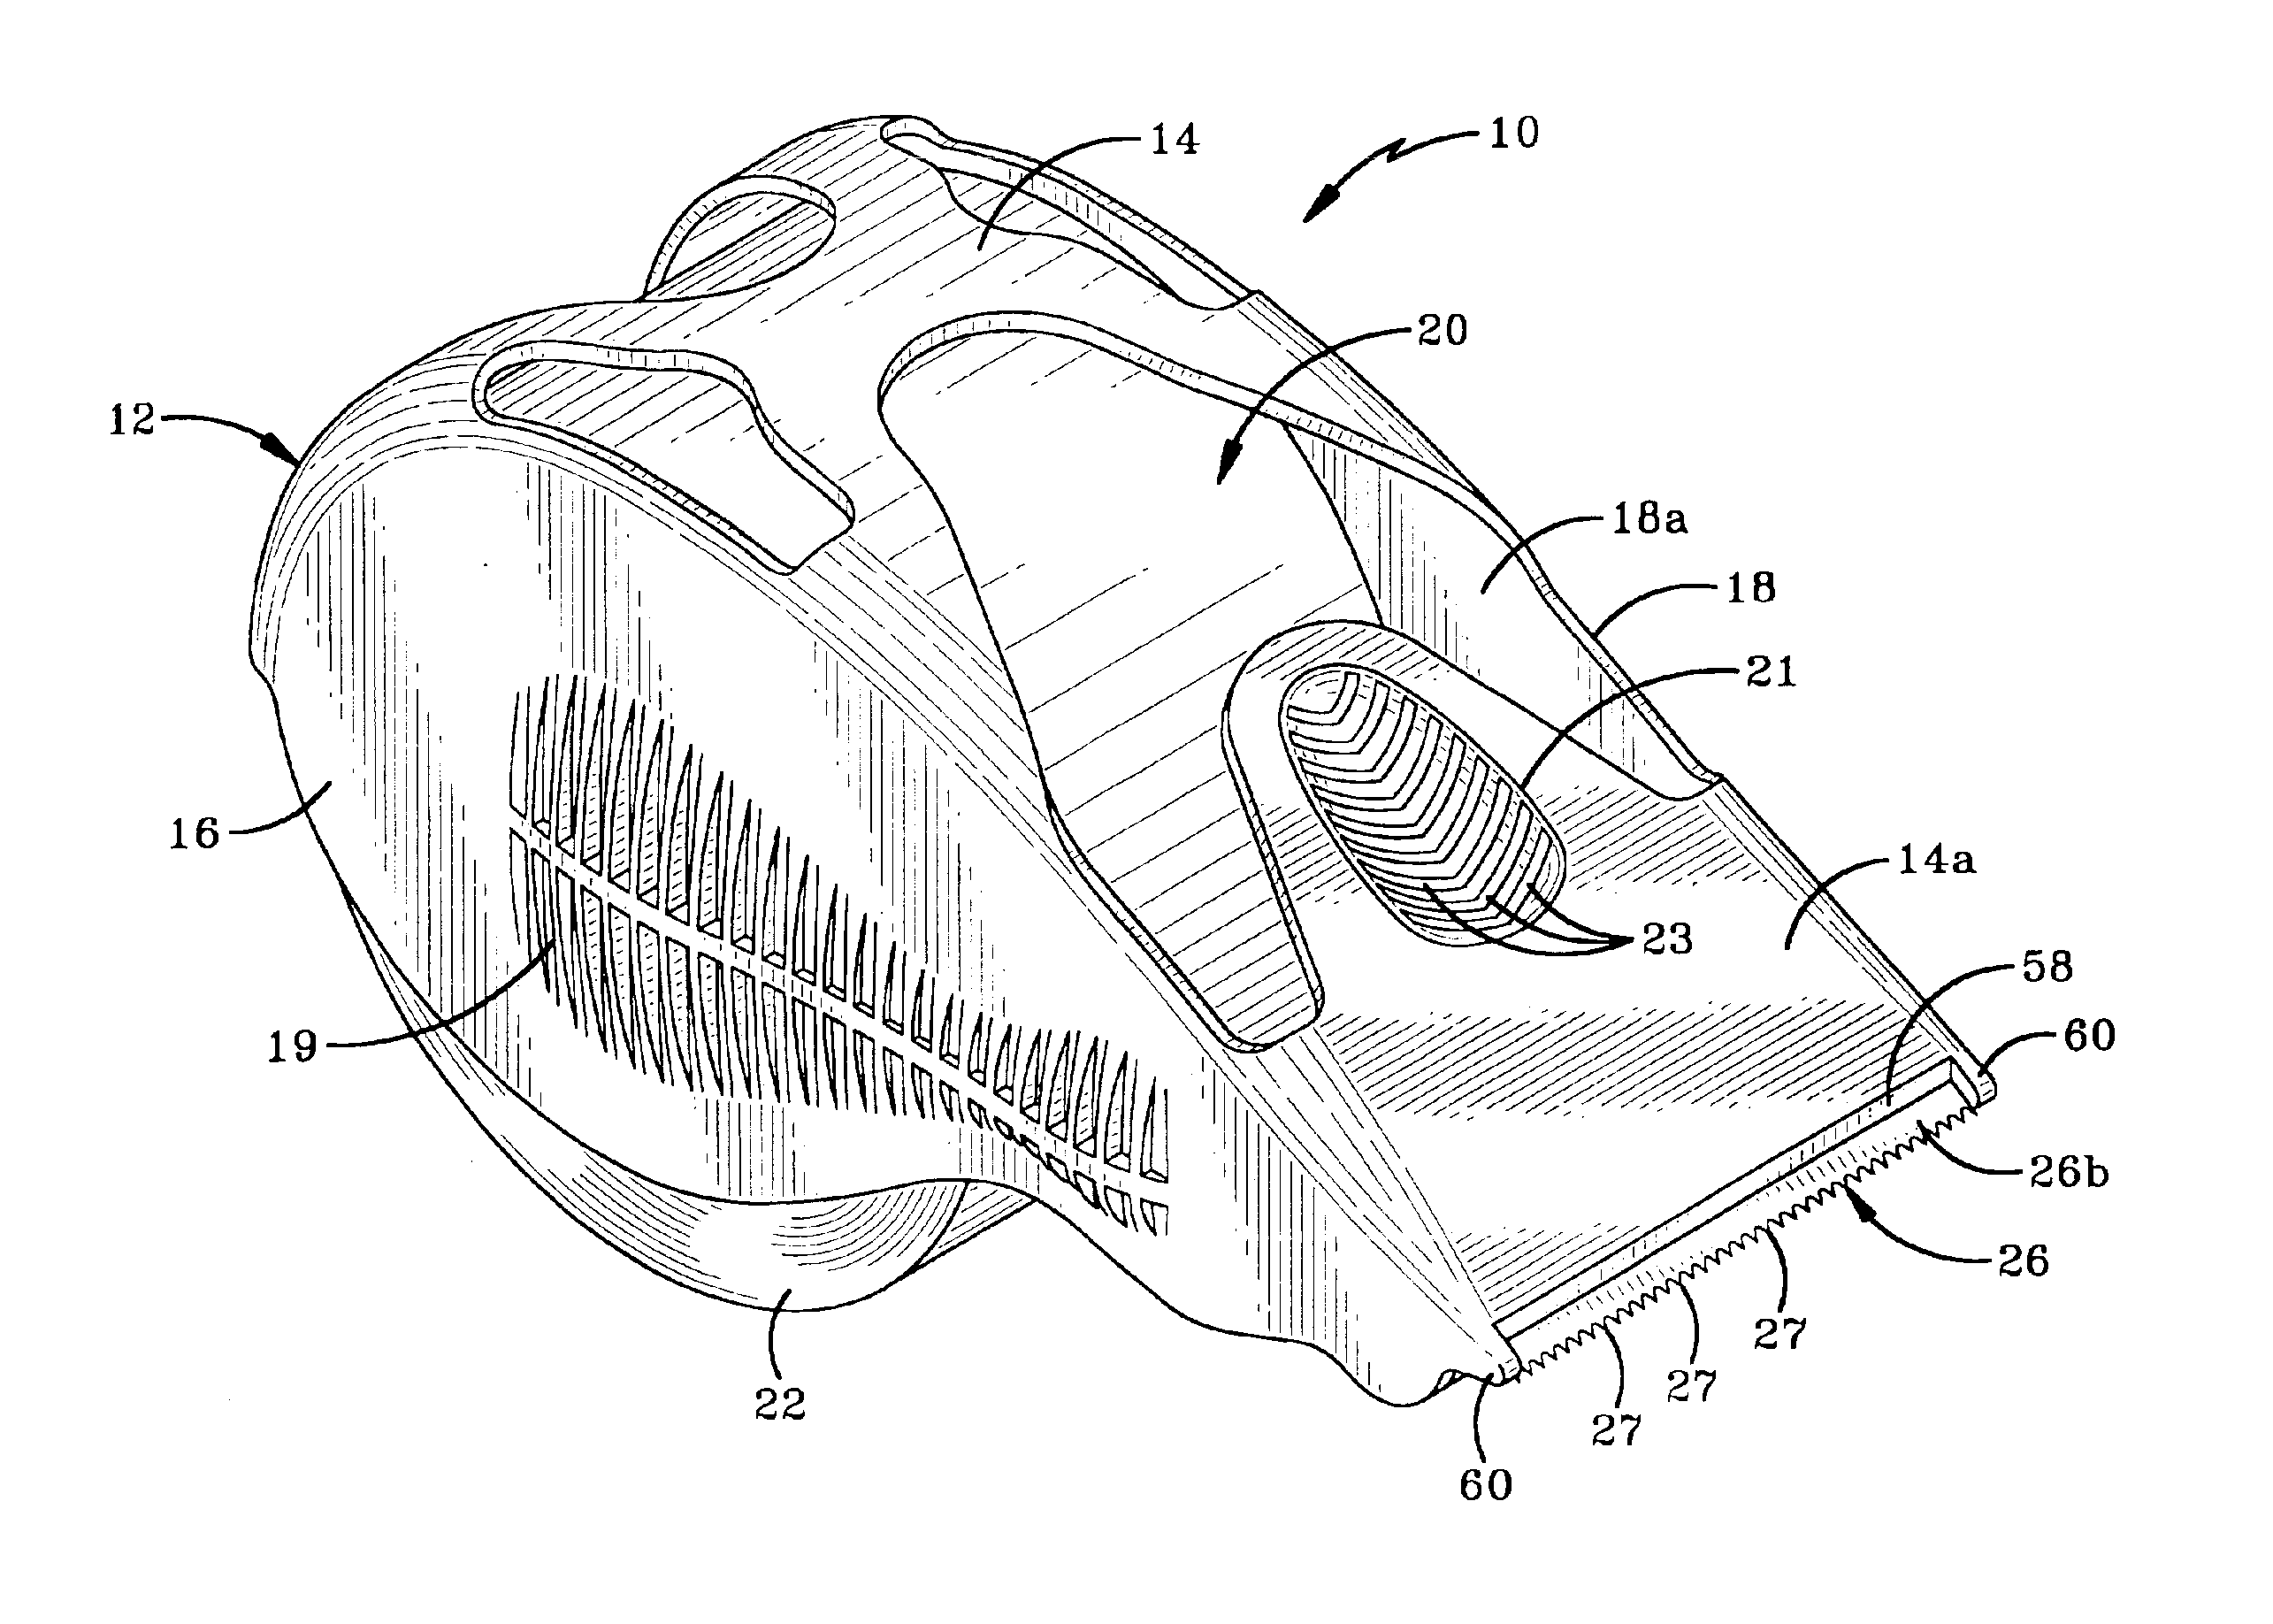 Tape dispenser having a tape retaining and application area